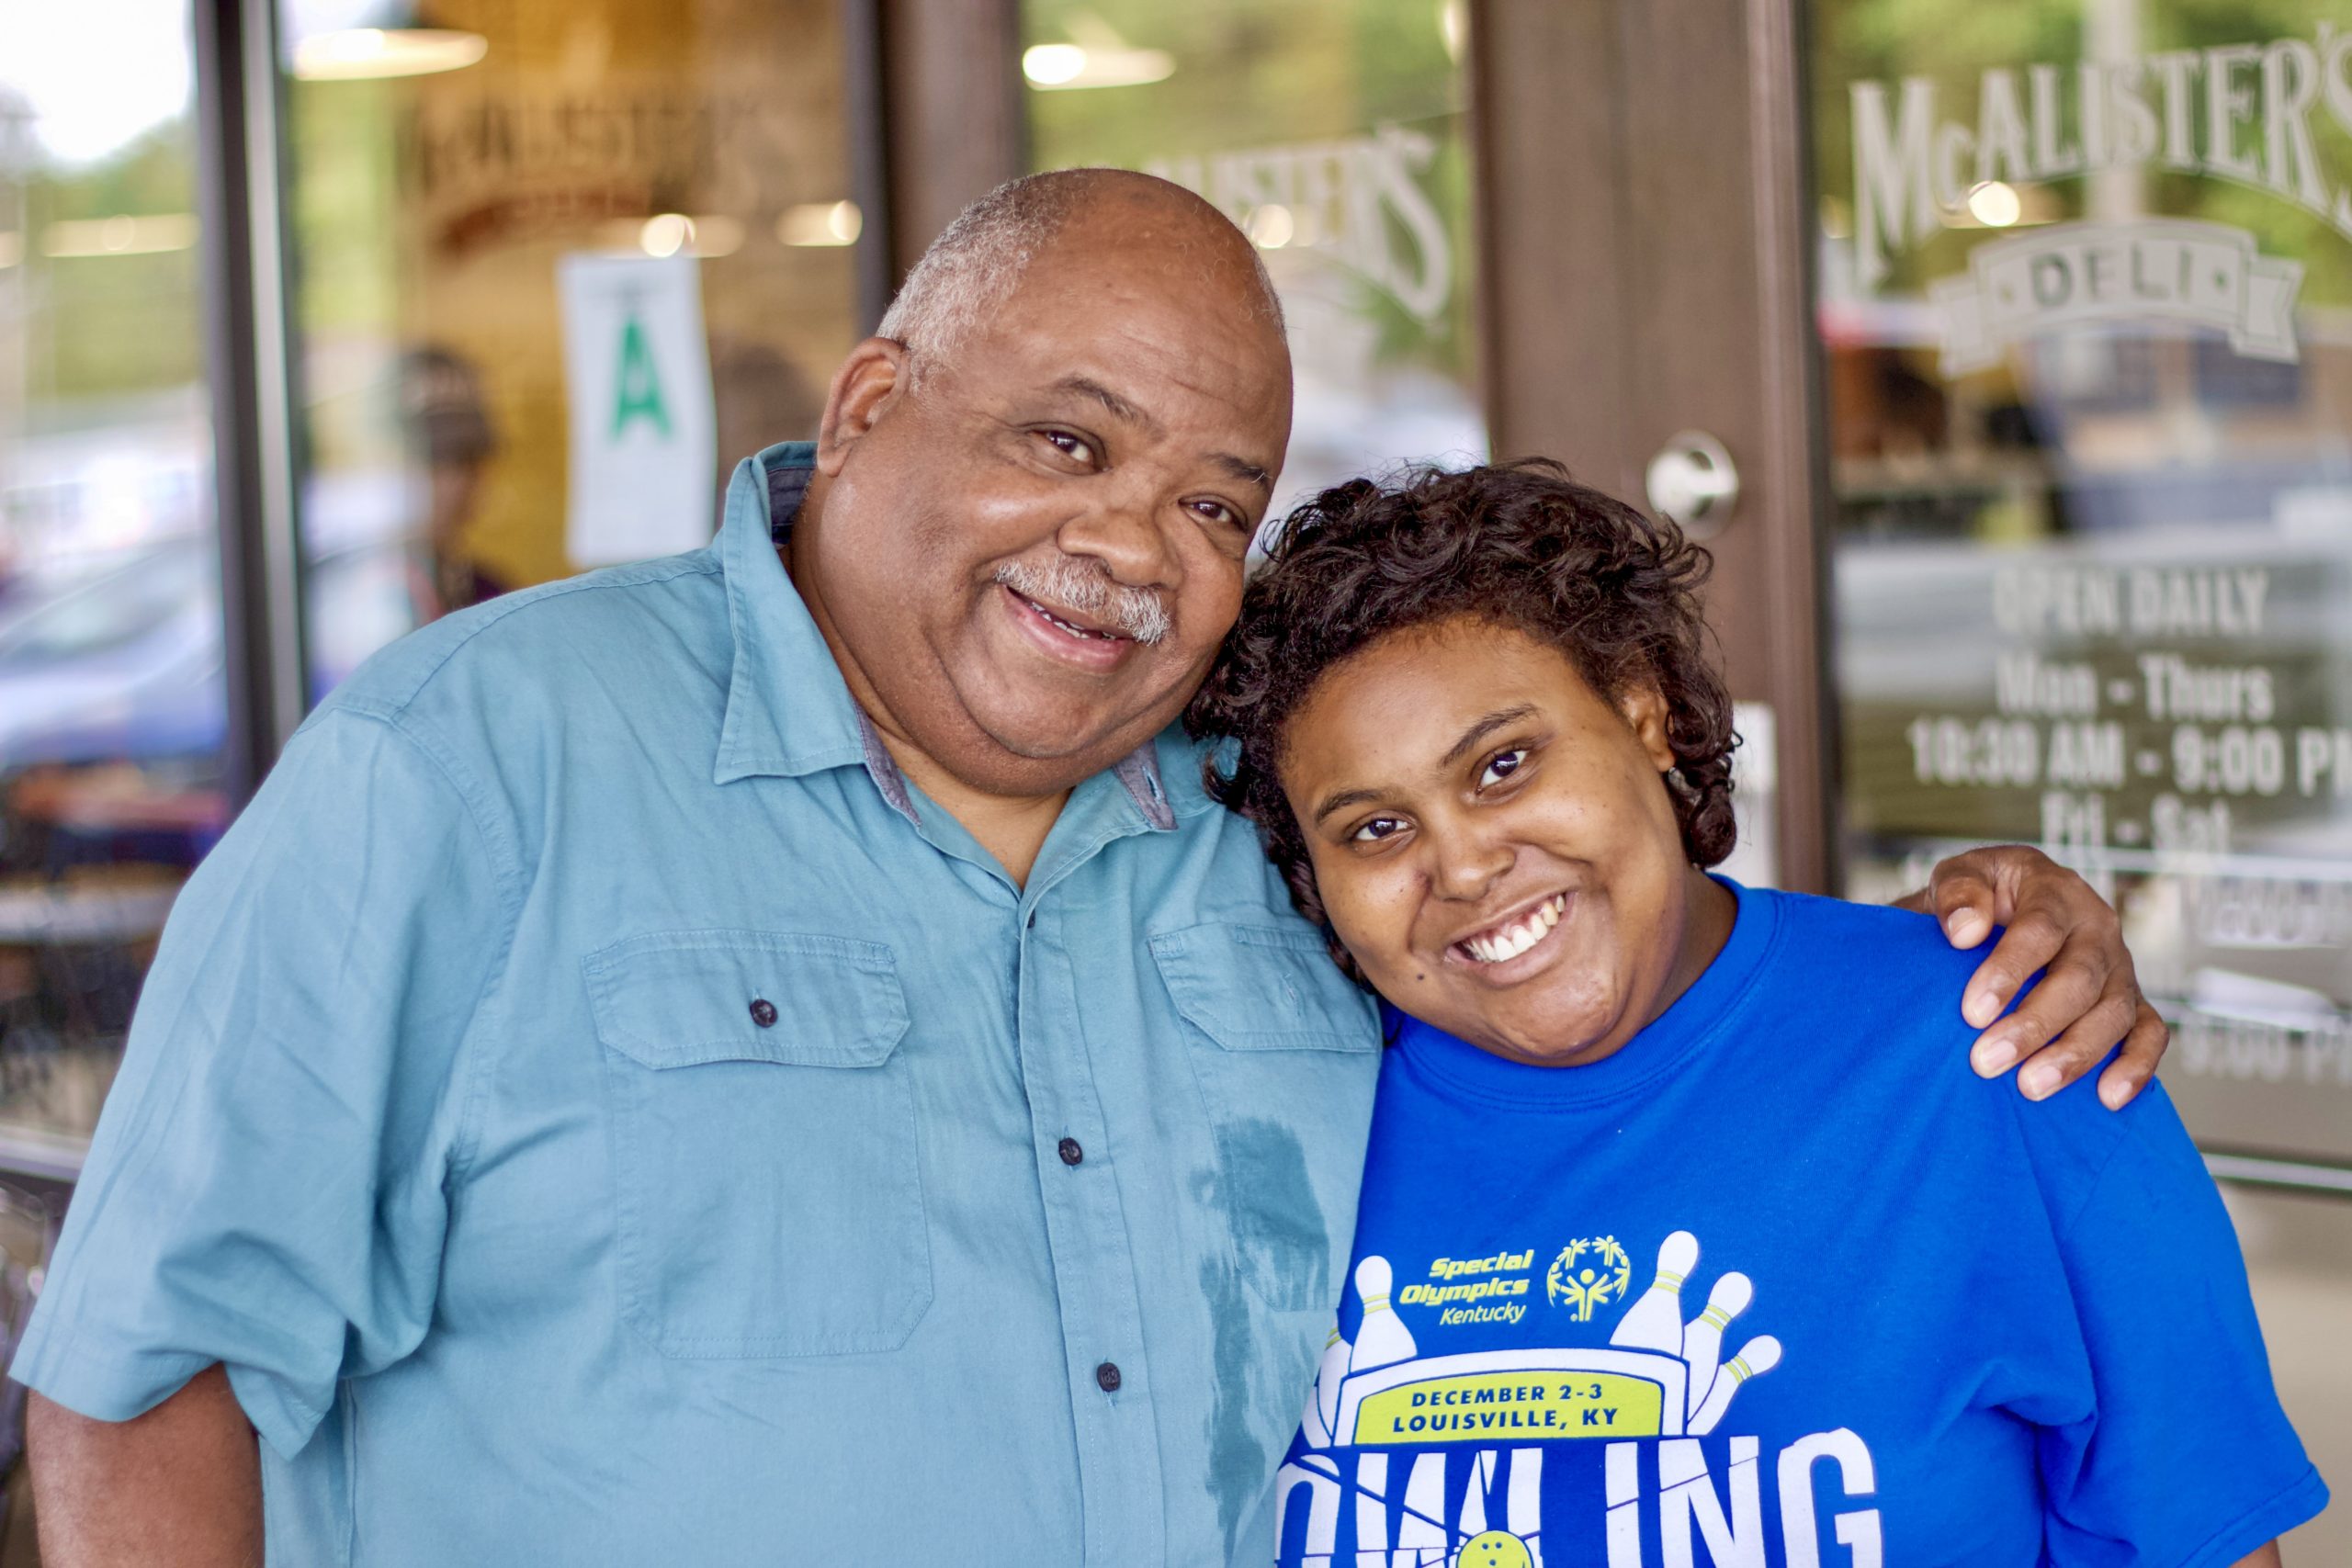 George Campbell (left) with his daughter, Jamesha Maddox, in front of the restaurant where she works, Louisville, Ky., July 2021.